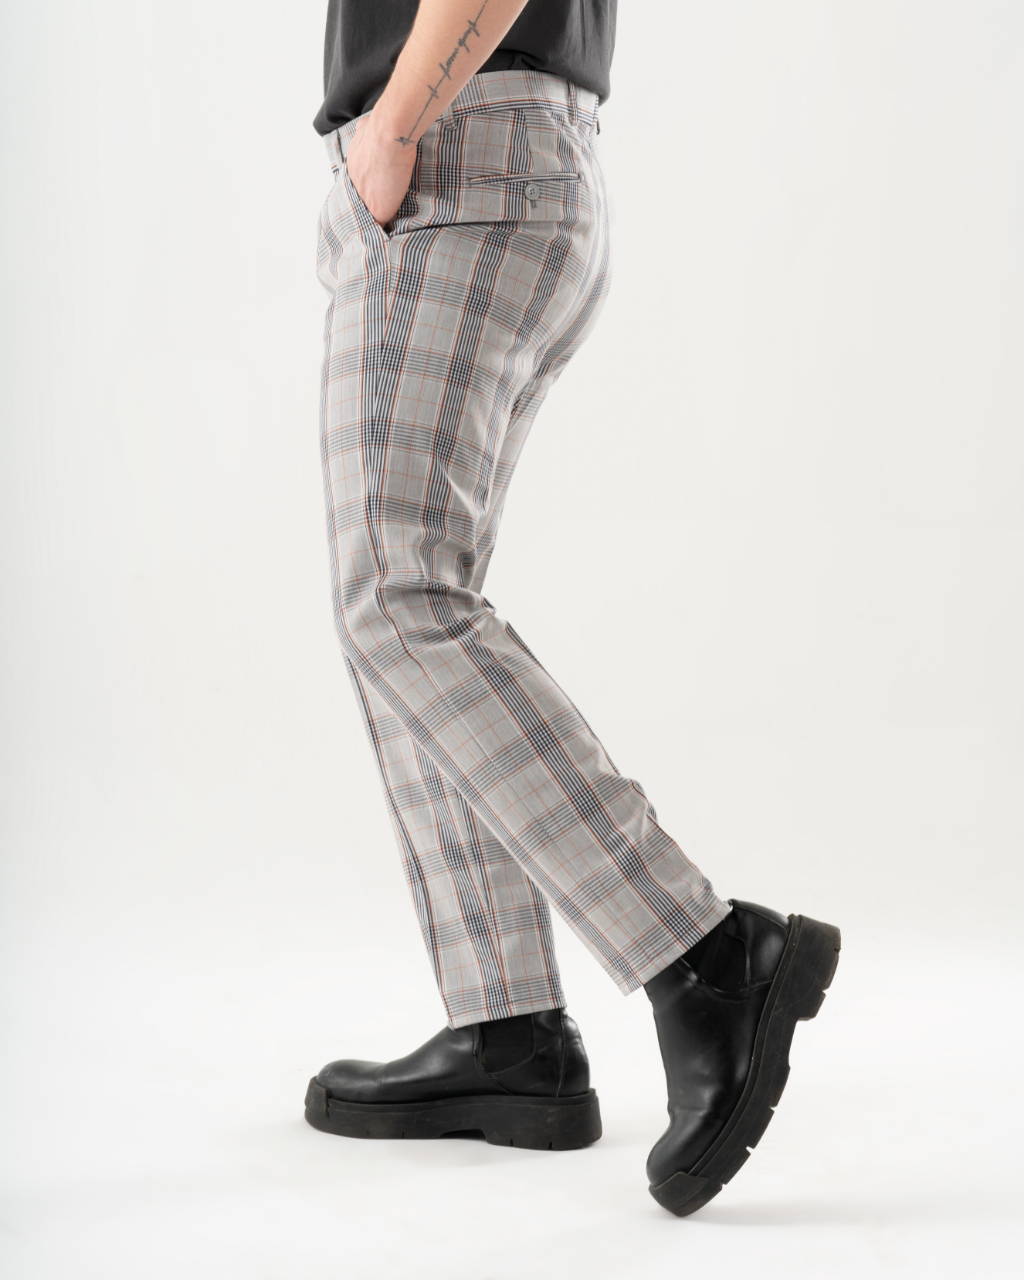 A man in KIKR PANTS is standing on a white background.